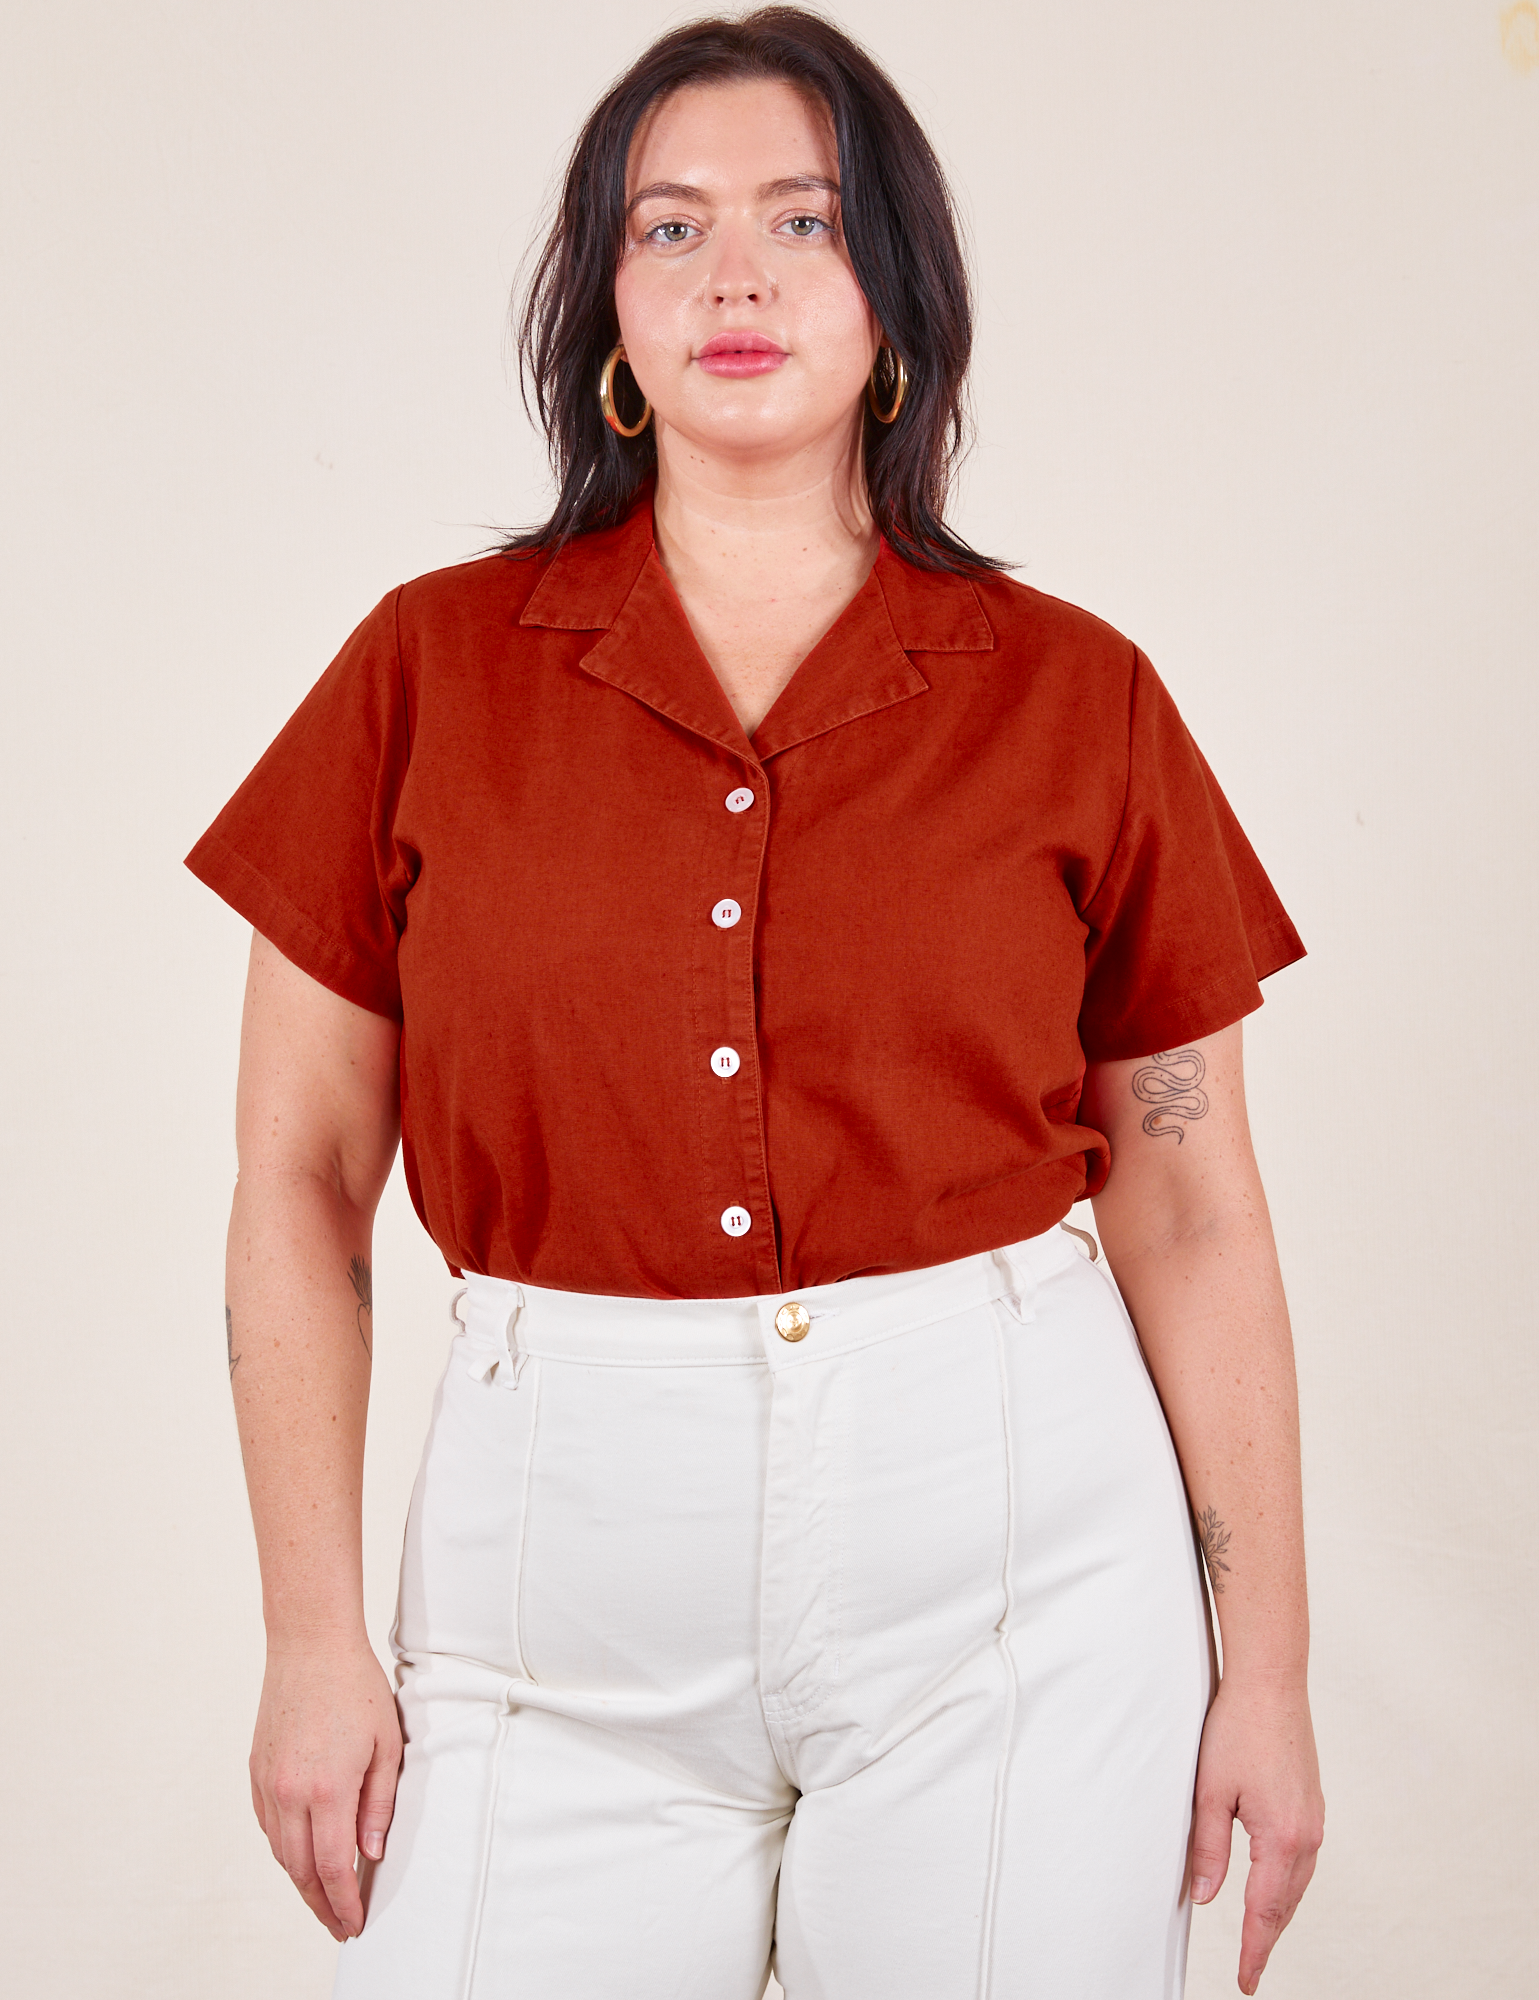 Faye is wearing Pantry Button-Up in Paprika tucked into vintage tee off-white Western Pants